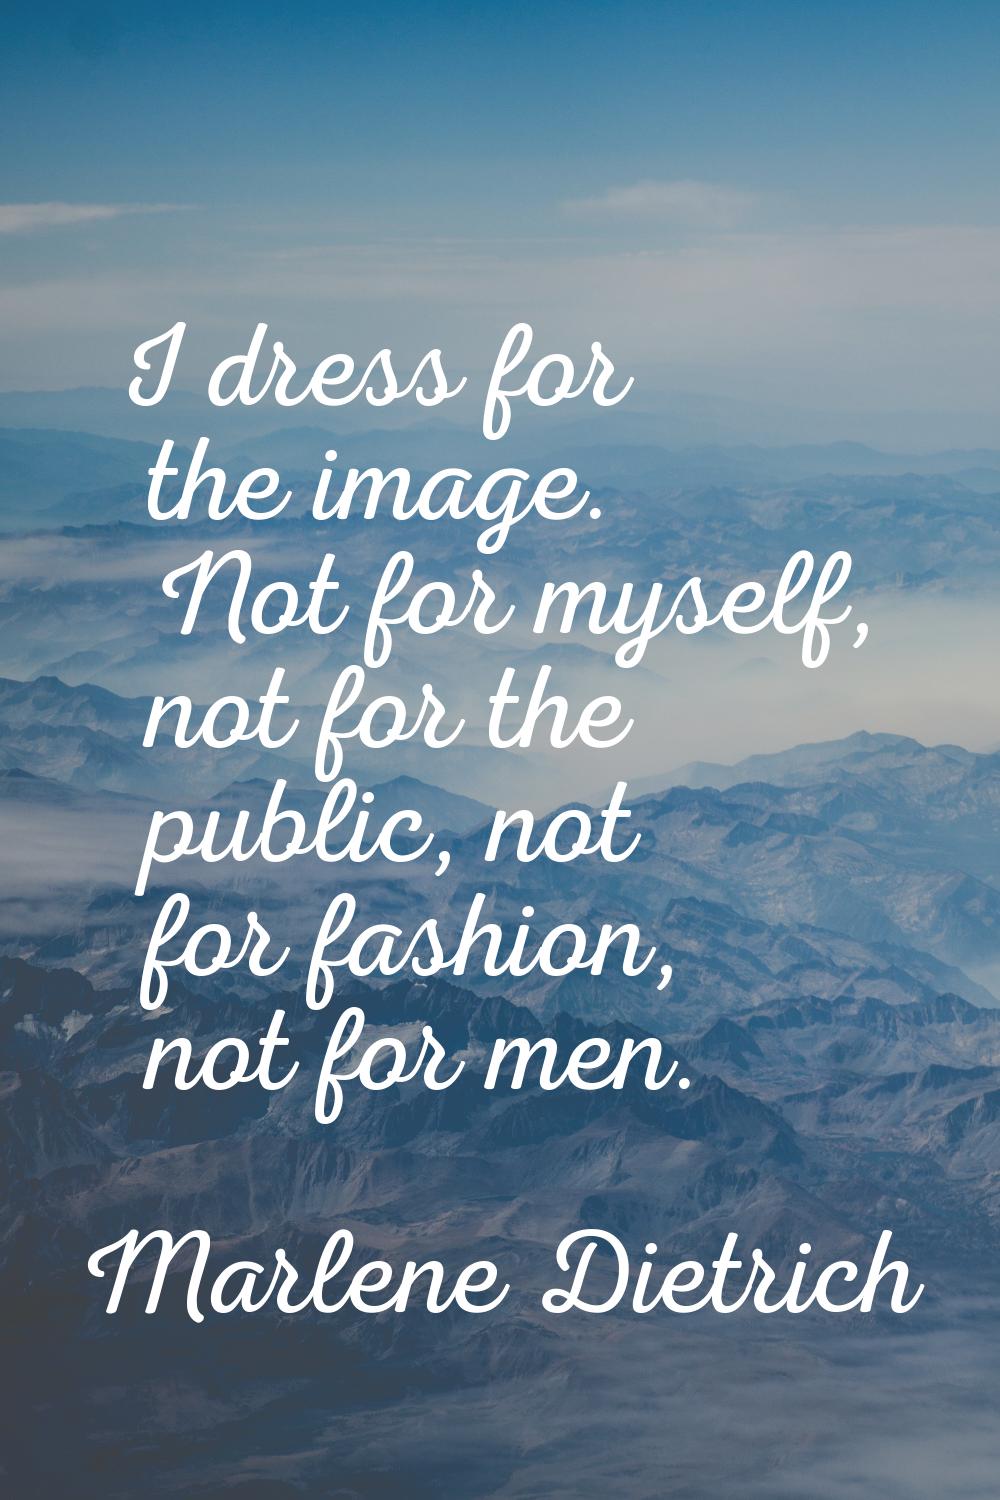 I dress for the image. Not for myself, not for the public, not for fashion, not for men.